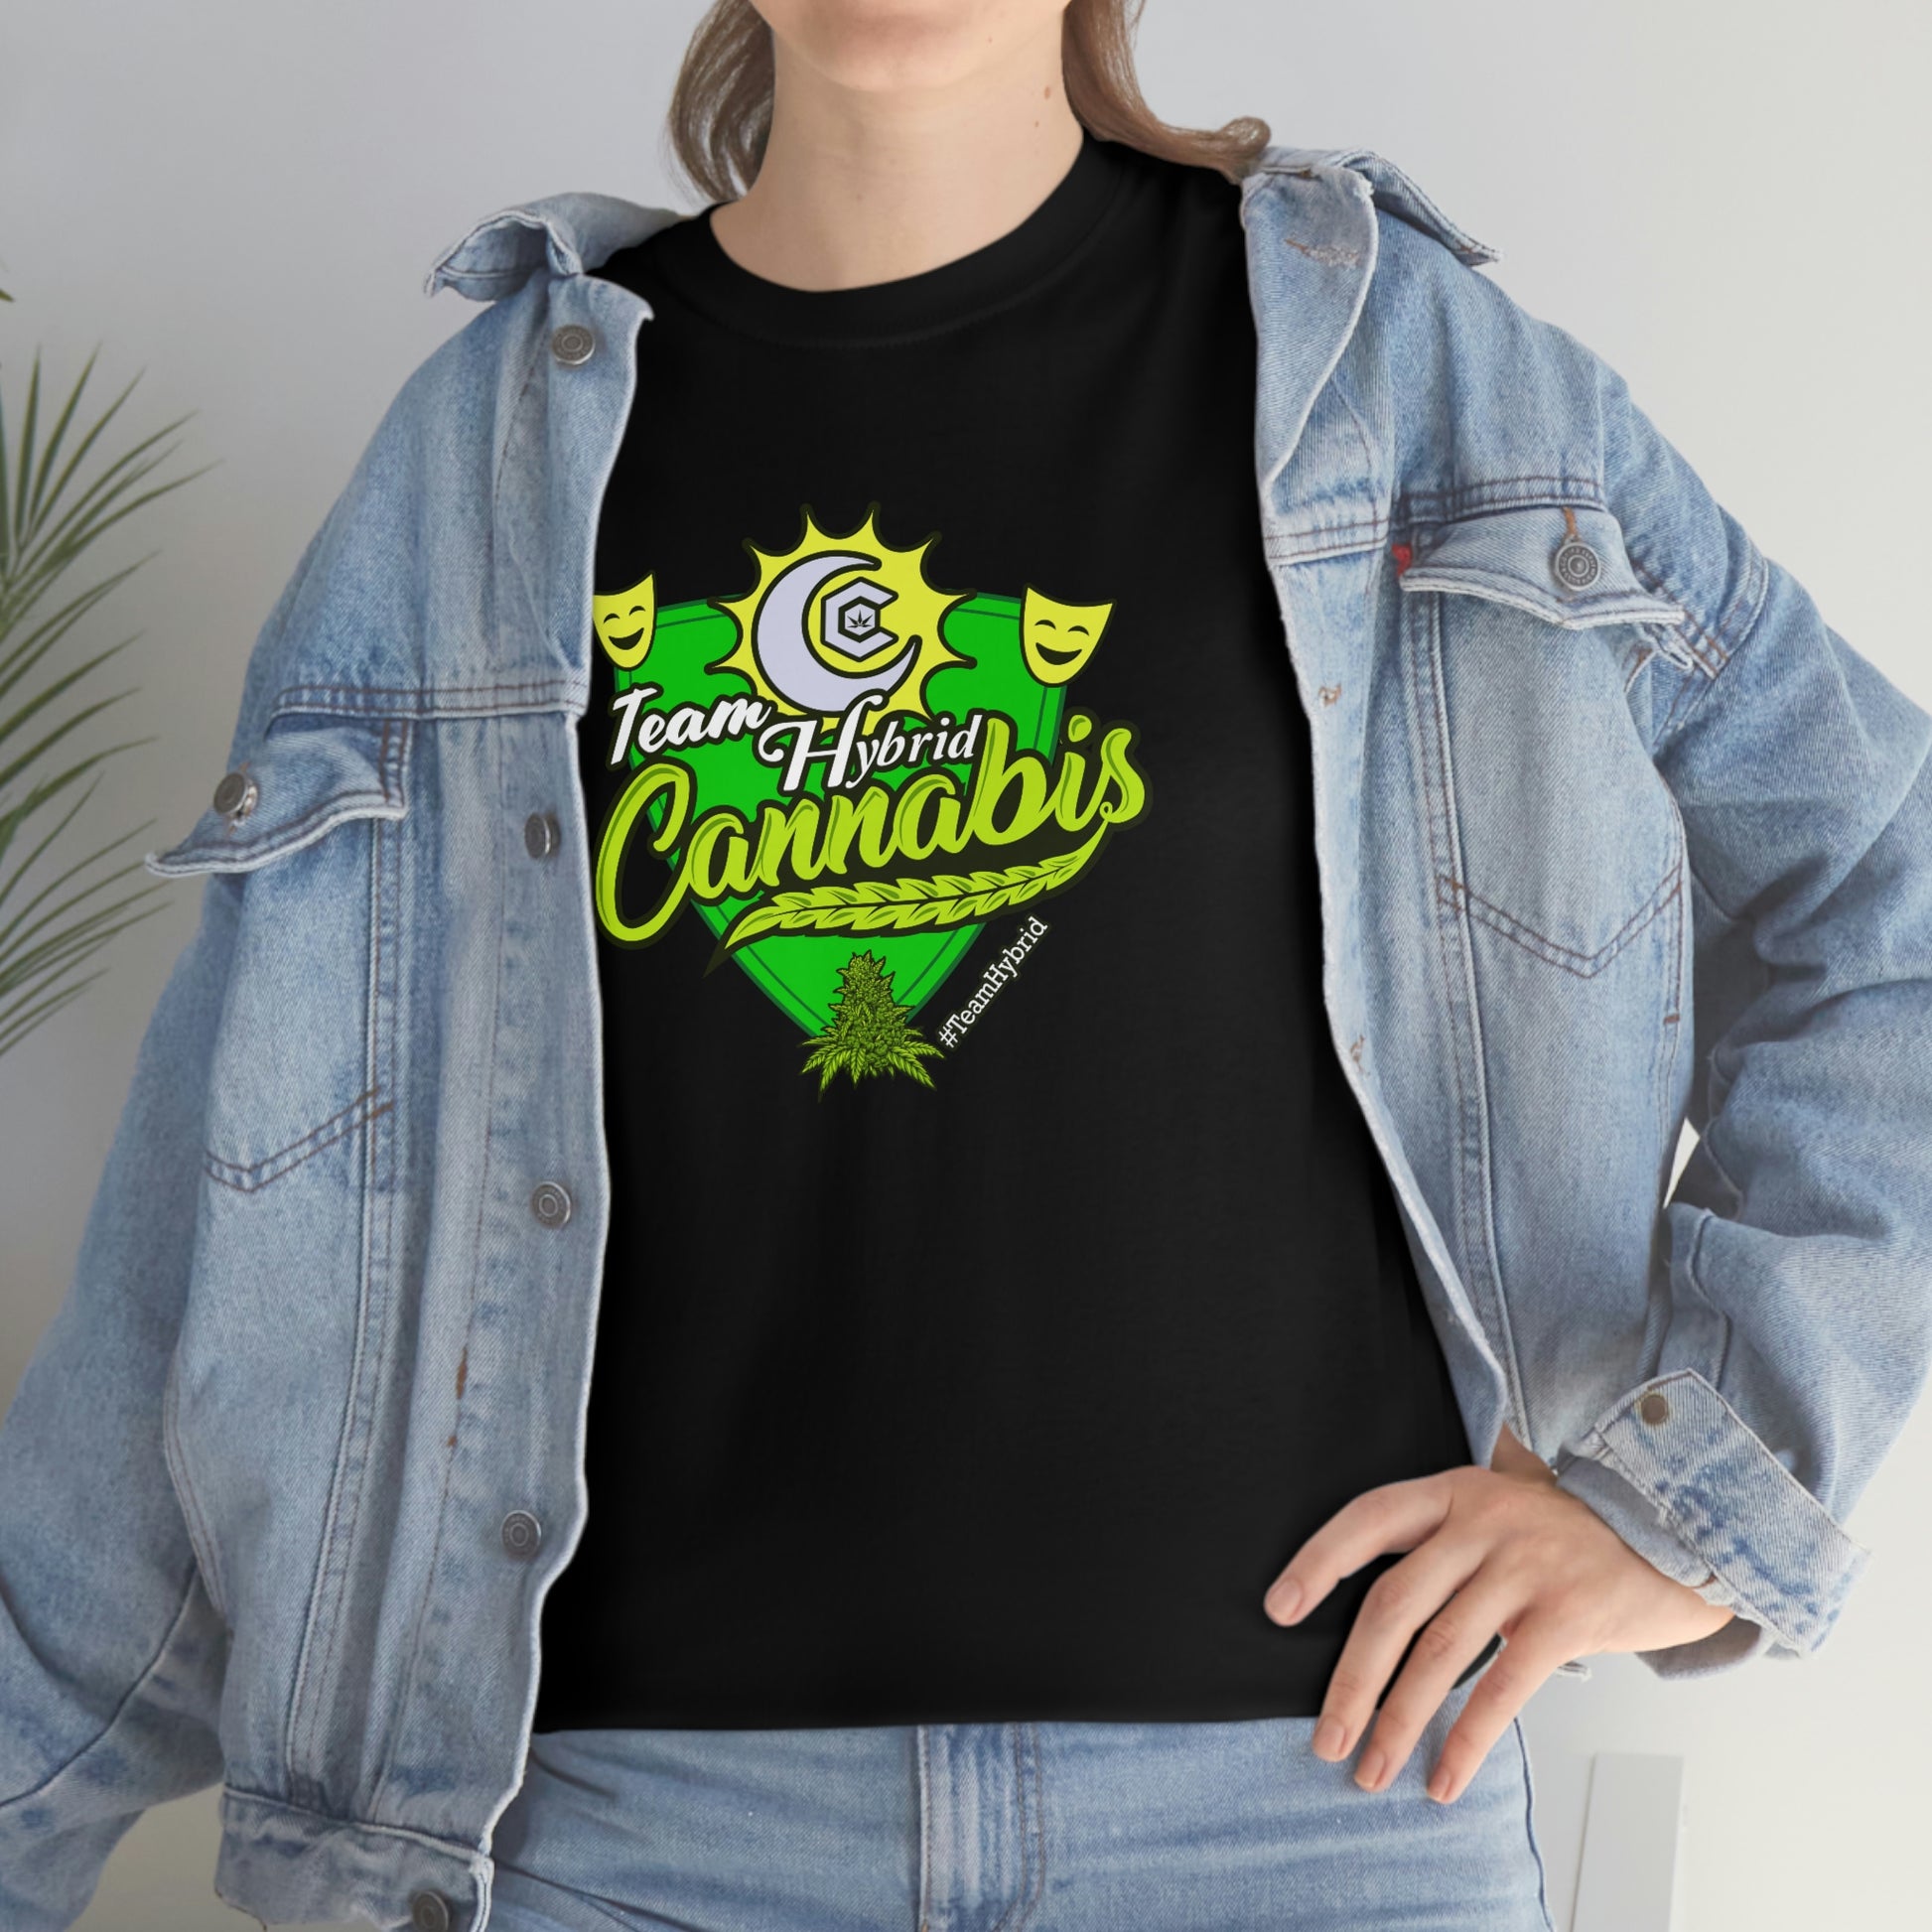 a woman wearing a Team Hybrid Cannabis T-shirt and jeans.